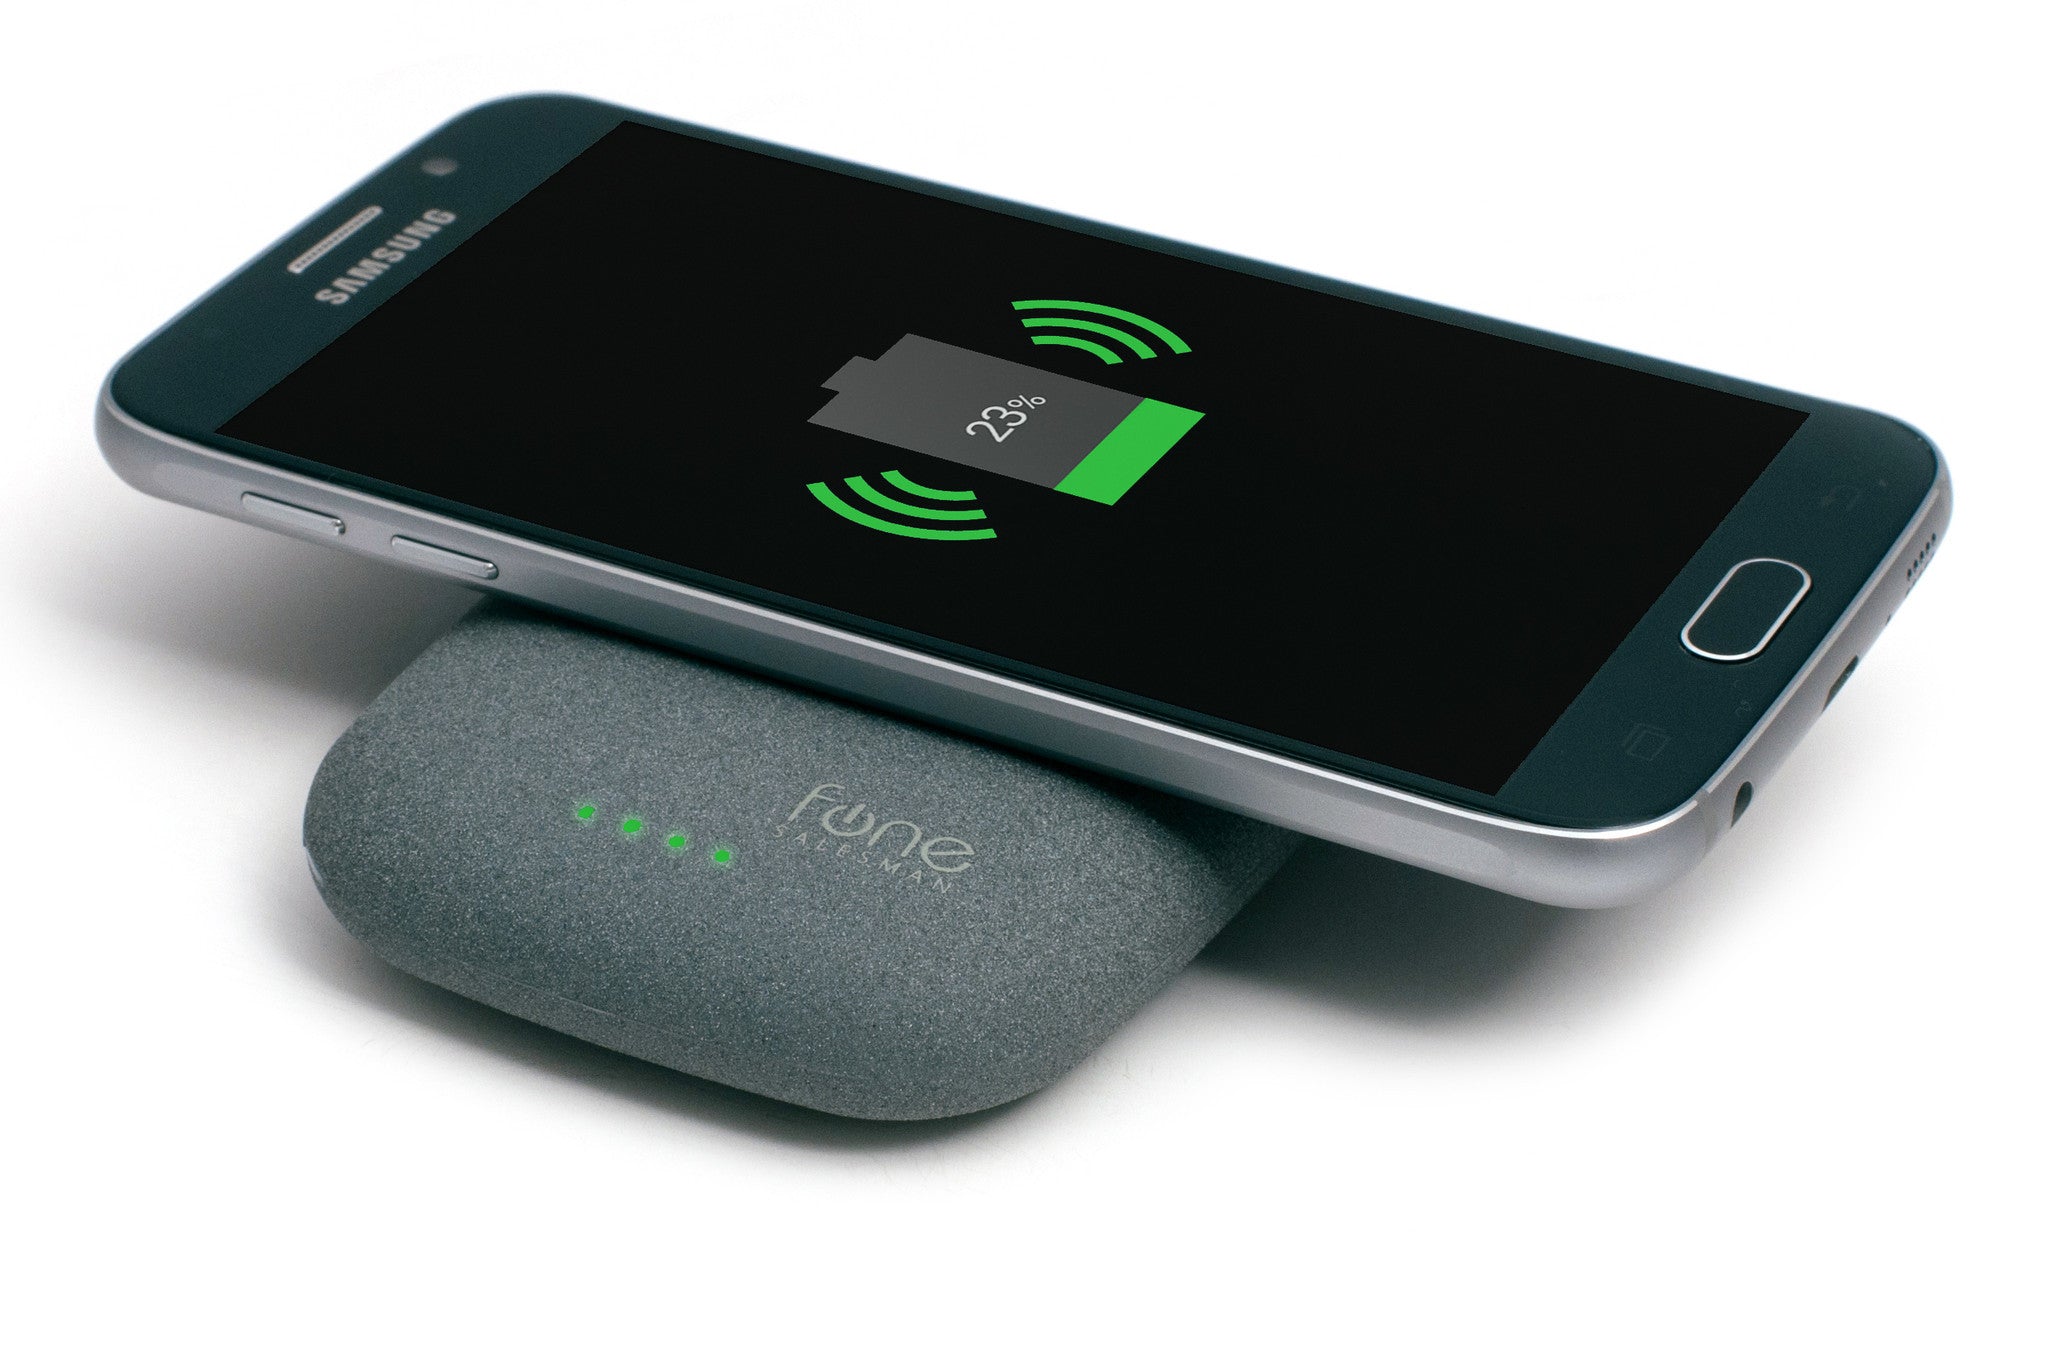 Qi enabled phones with wireless charging - compatible devices - Zens